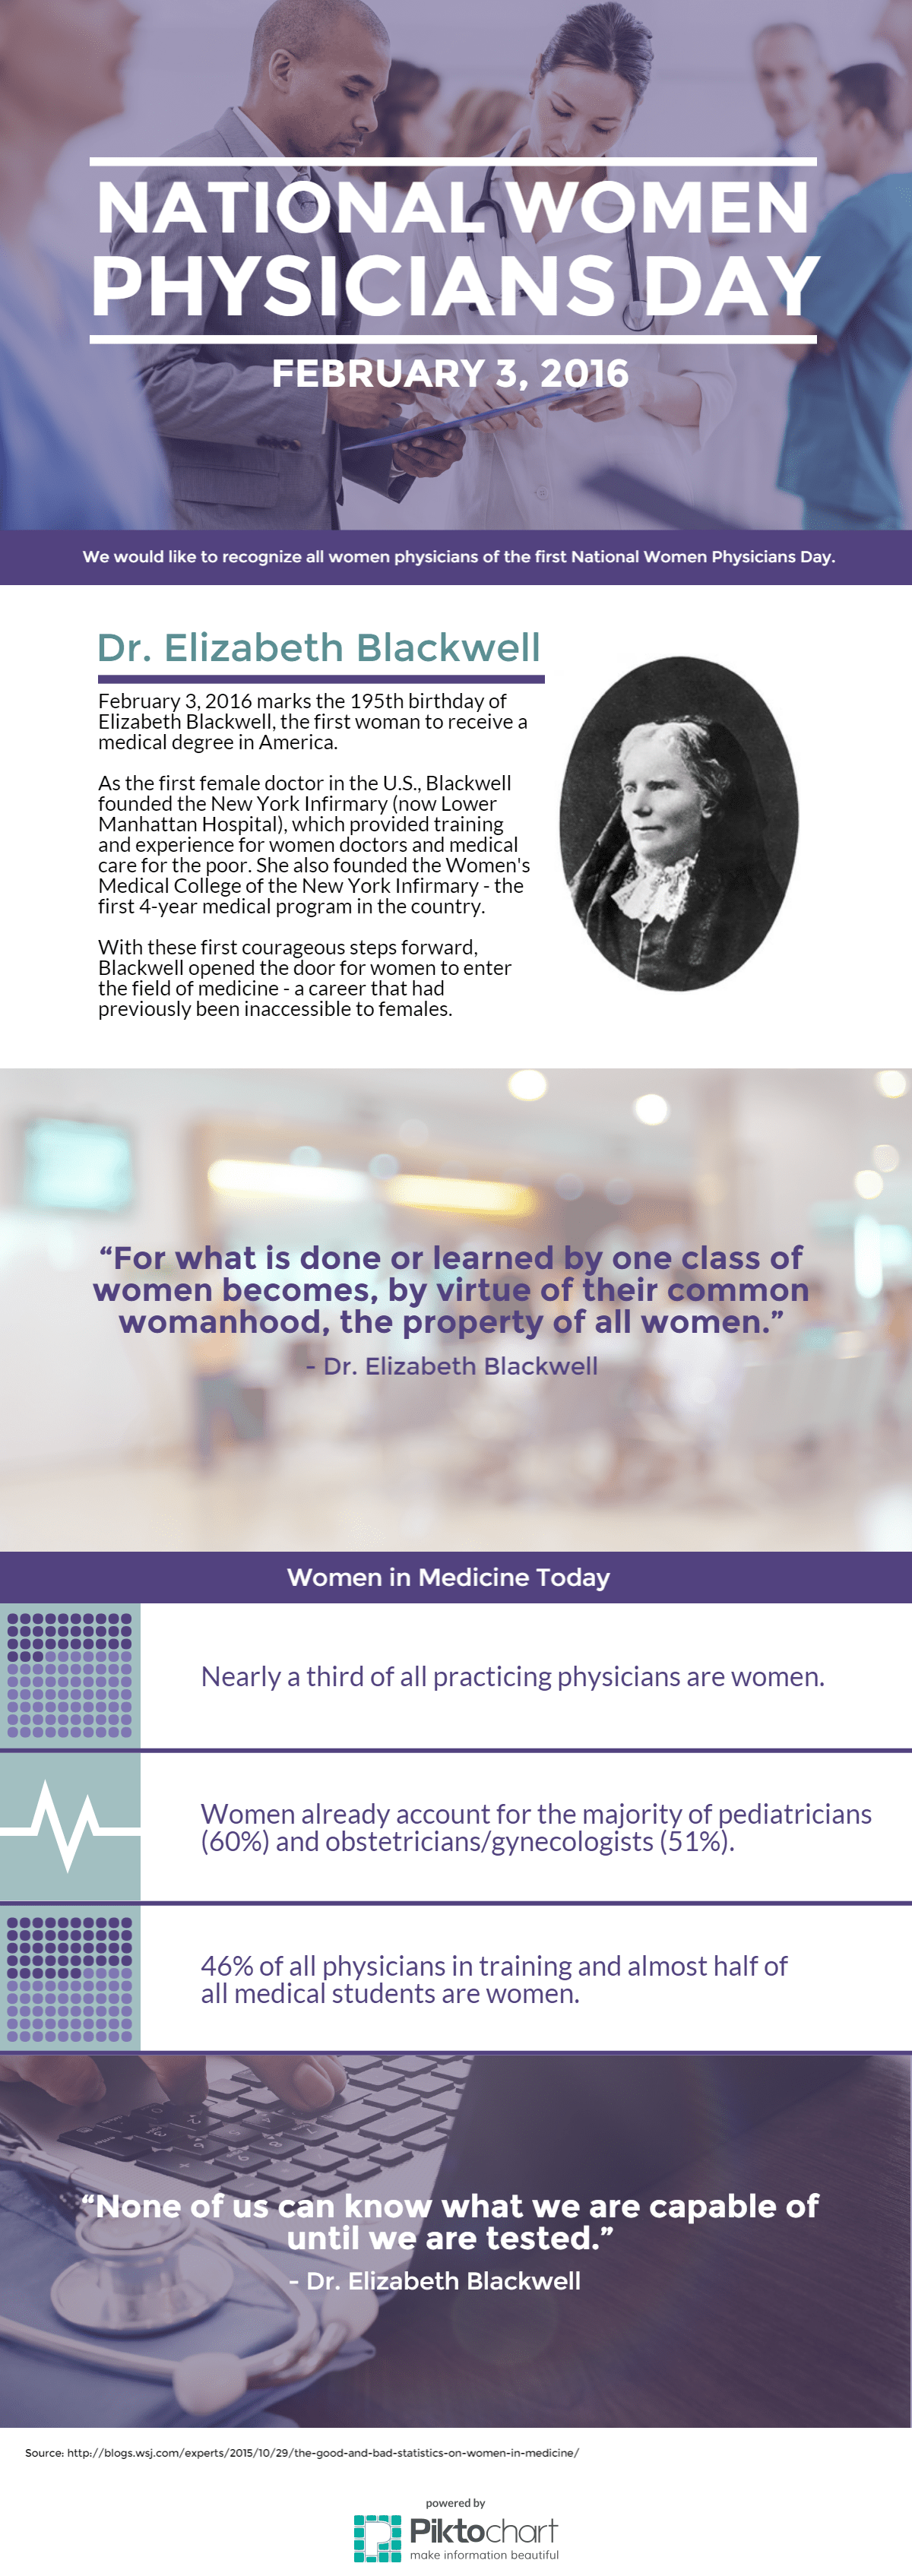 Flyer for National Women Physician's Day, 2016. Contains a blurb about Dr. Elizabeth Blackwell, a quote from her, some stats about women in medicine, followed by another quote.